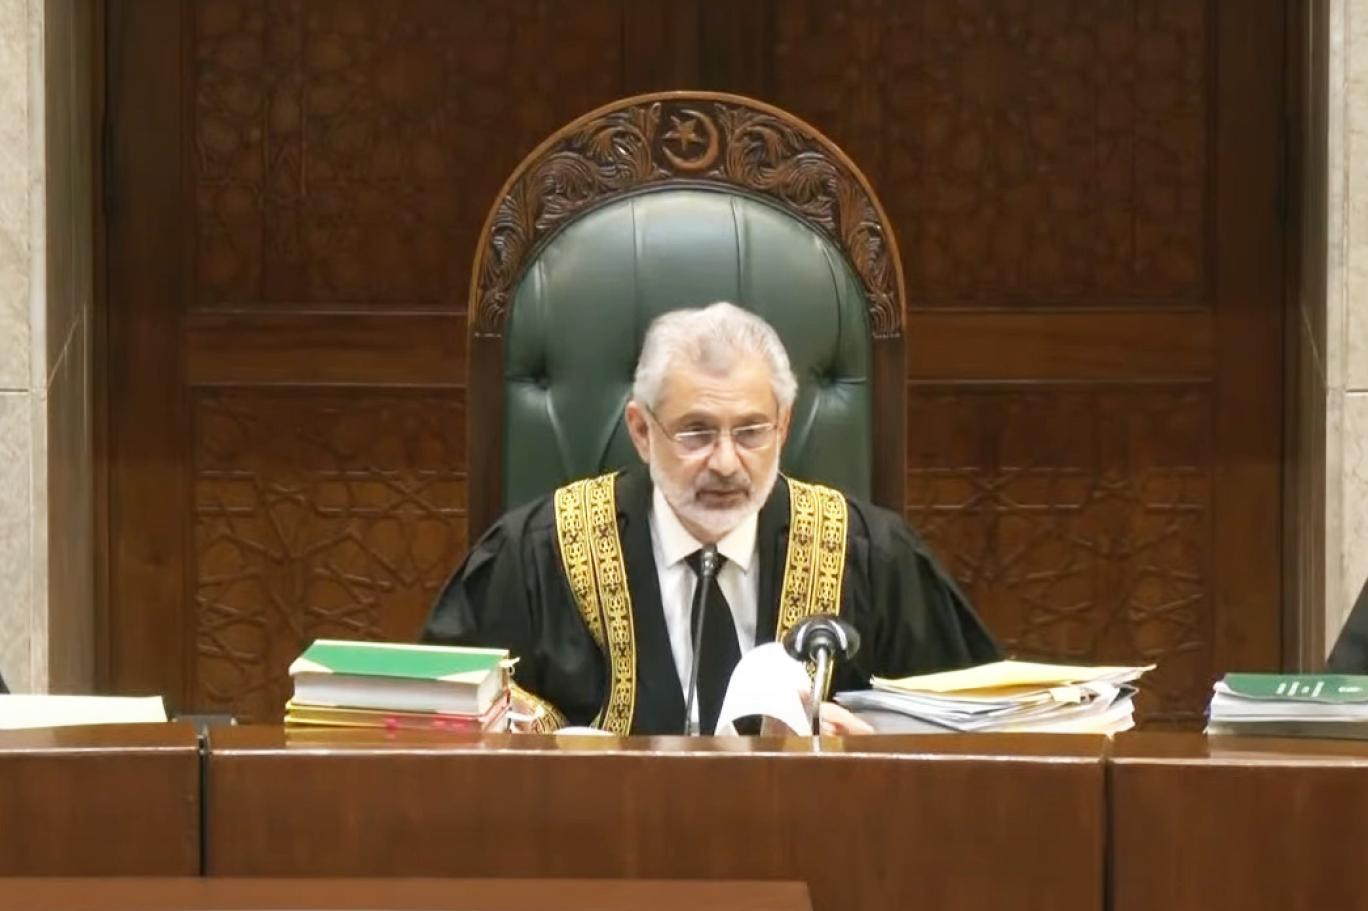 If you wish to carry an ordinance, then shut the parliament, Chief Justice of Pakistan